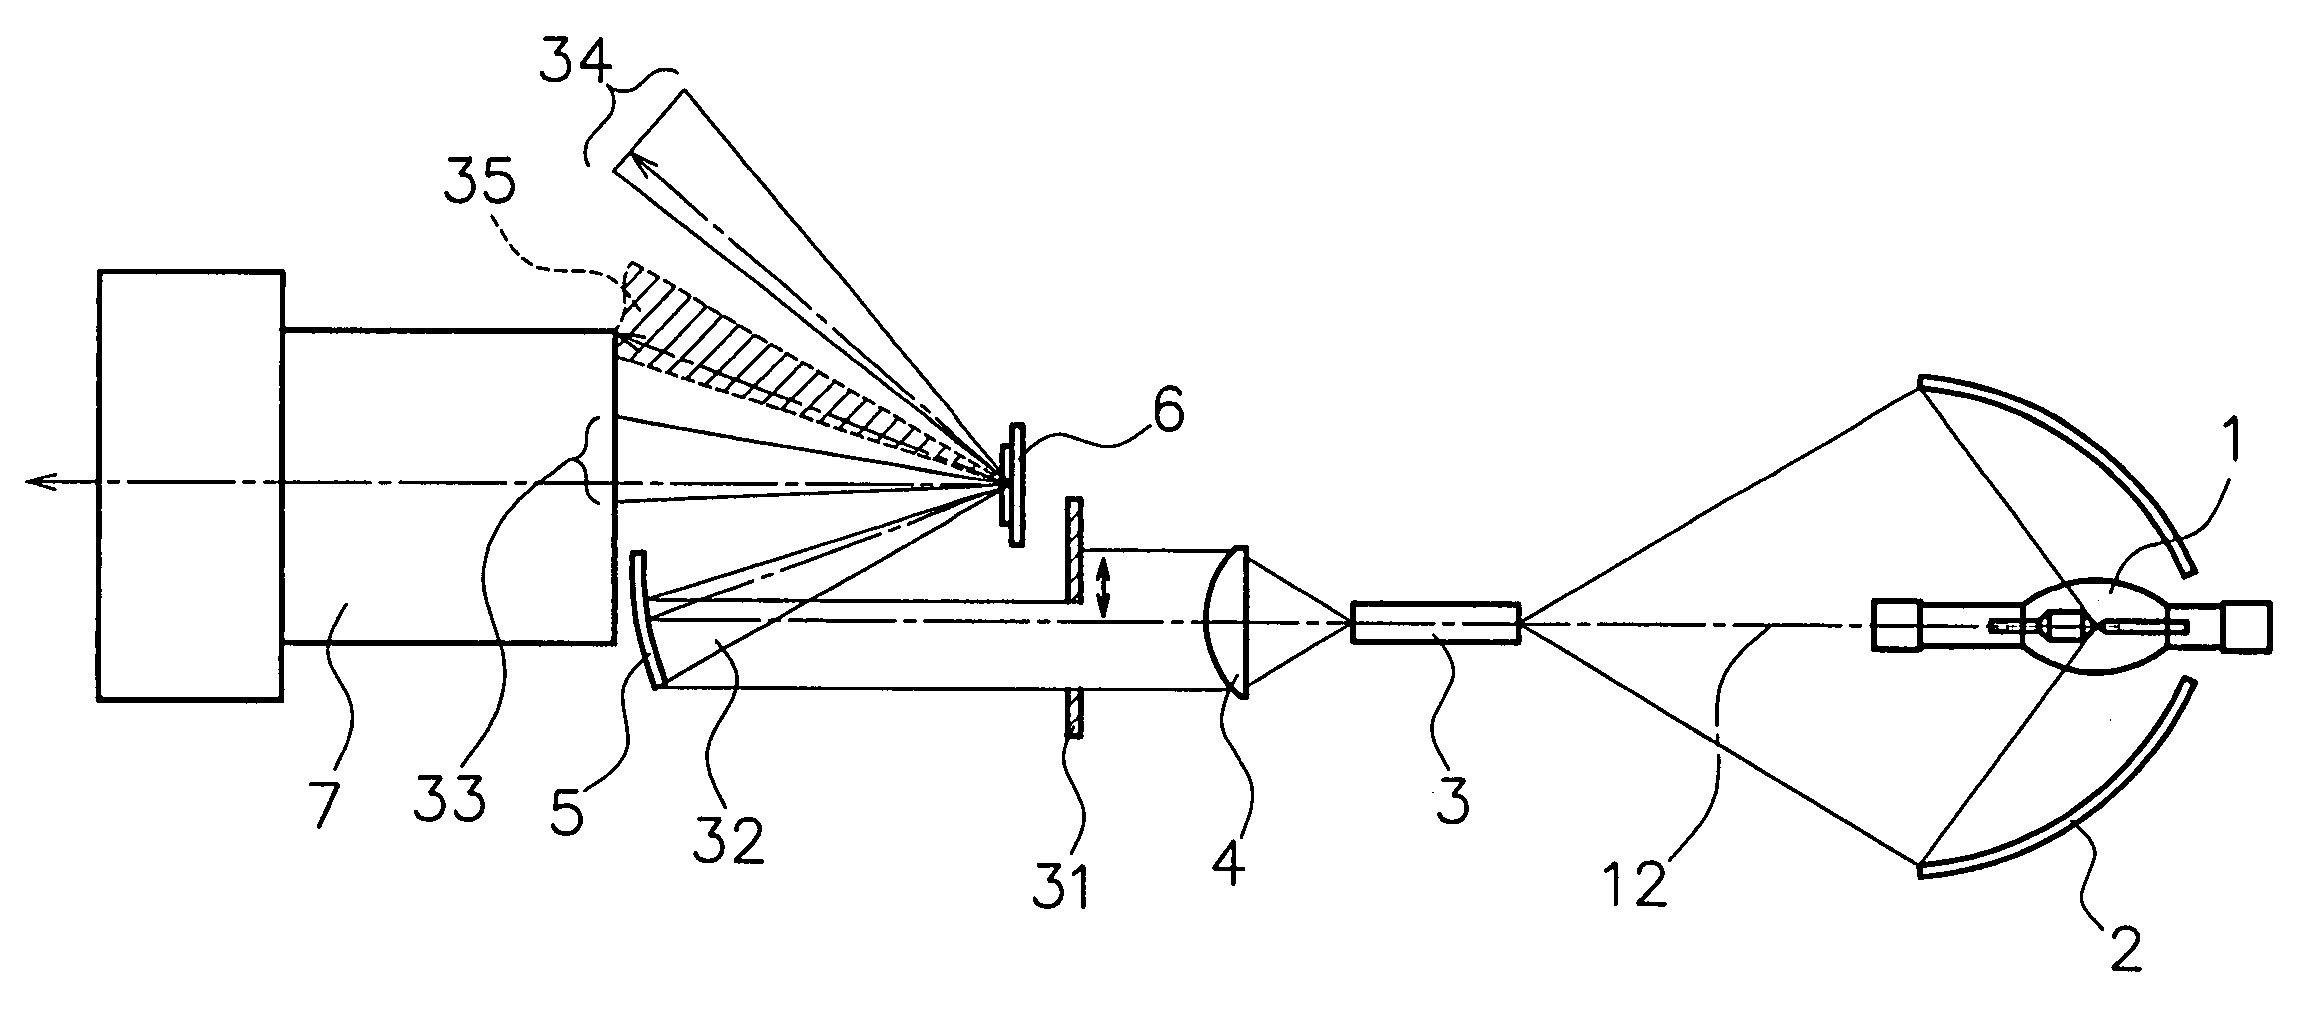 Projection-type display apparatus